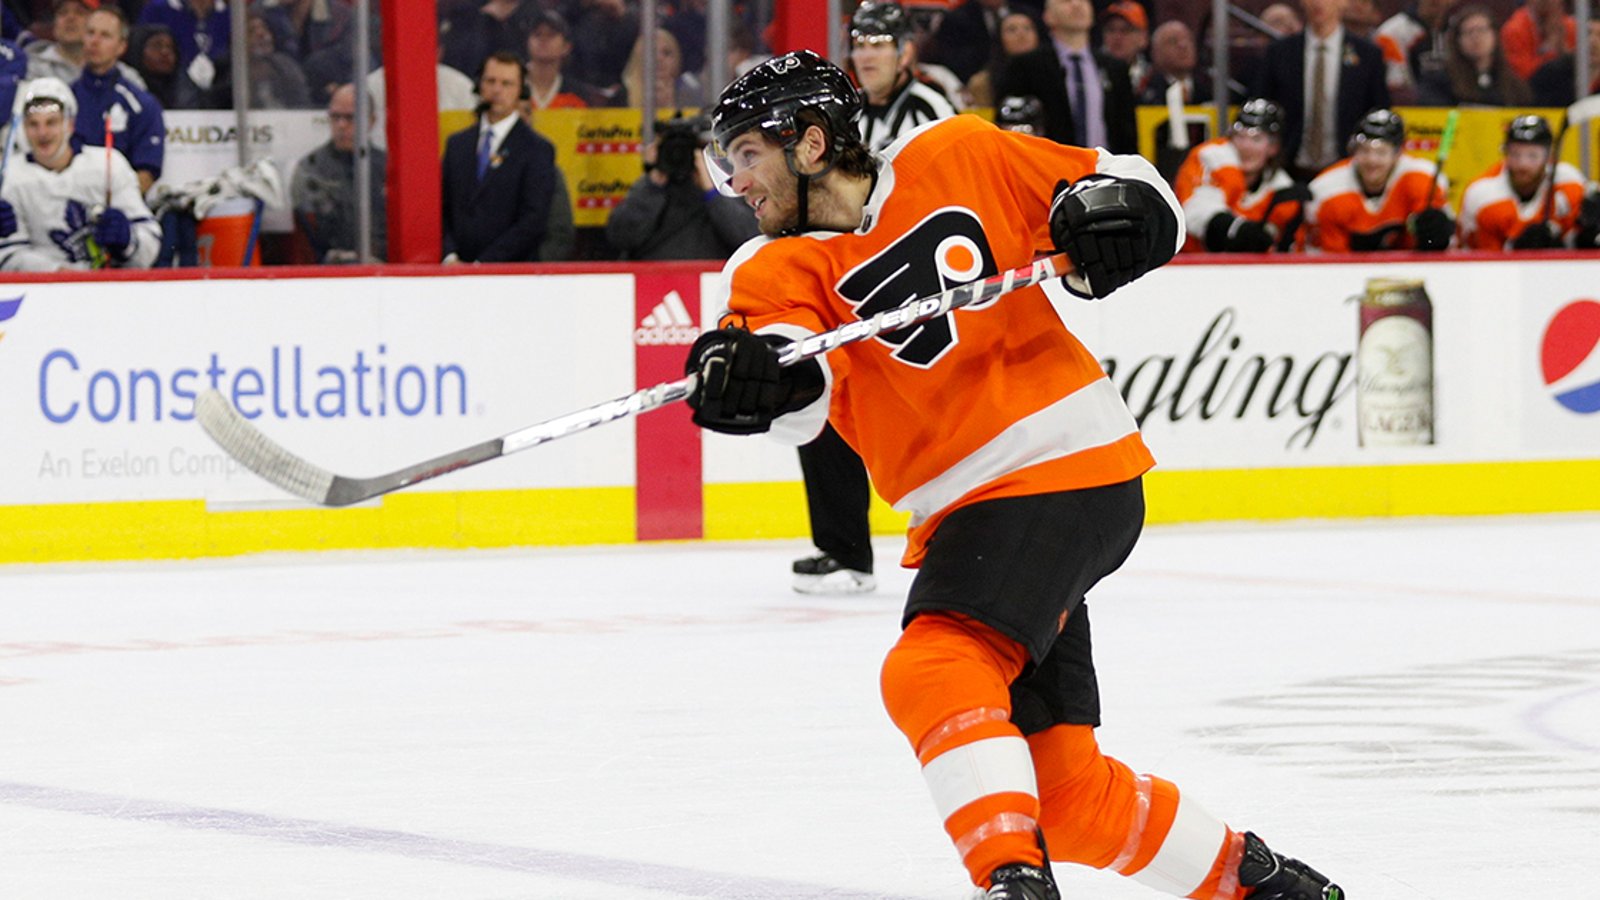 ICYMI: Flyers trade key player from Simmonds trade